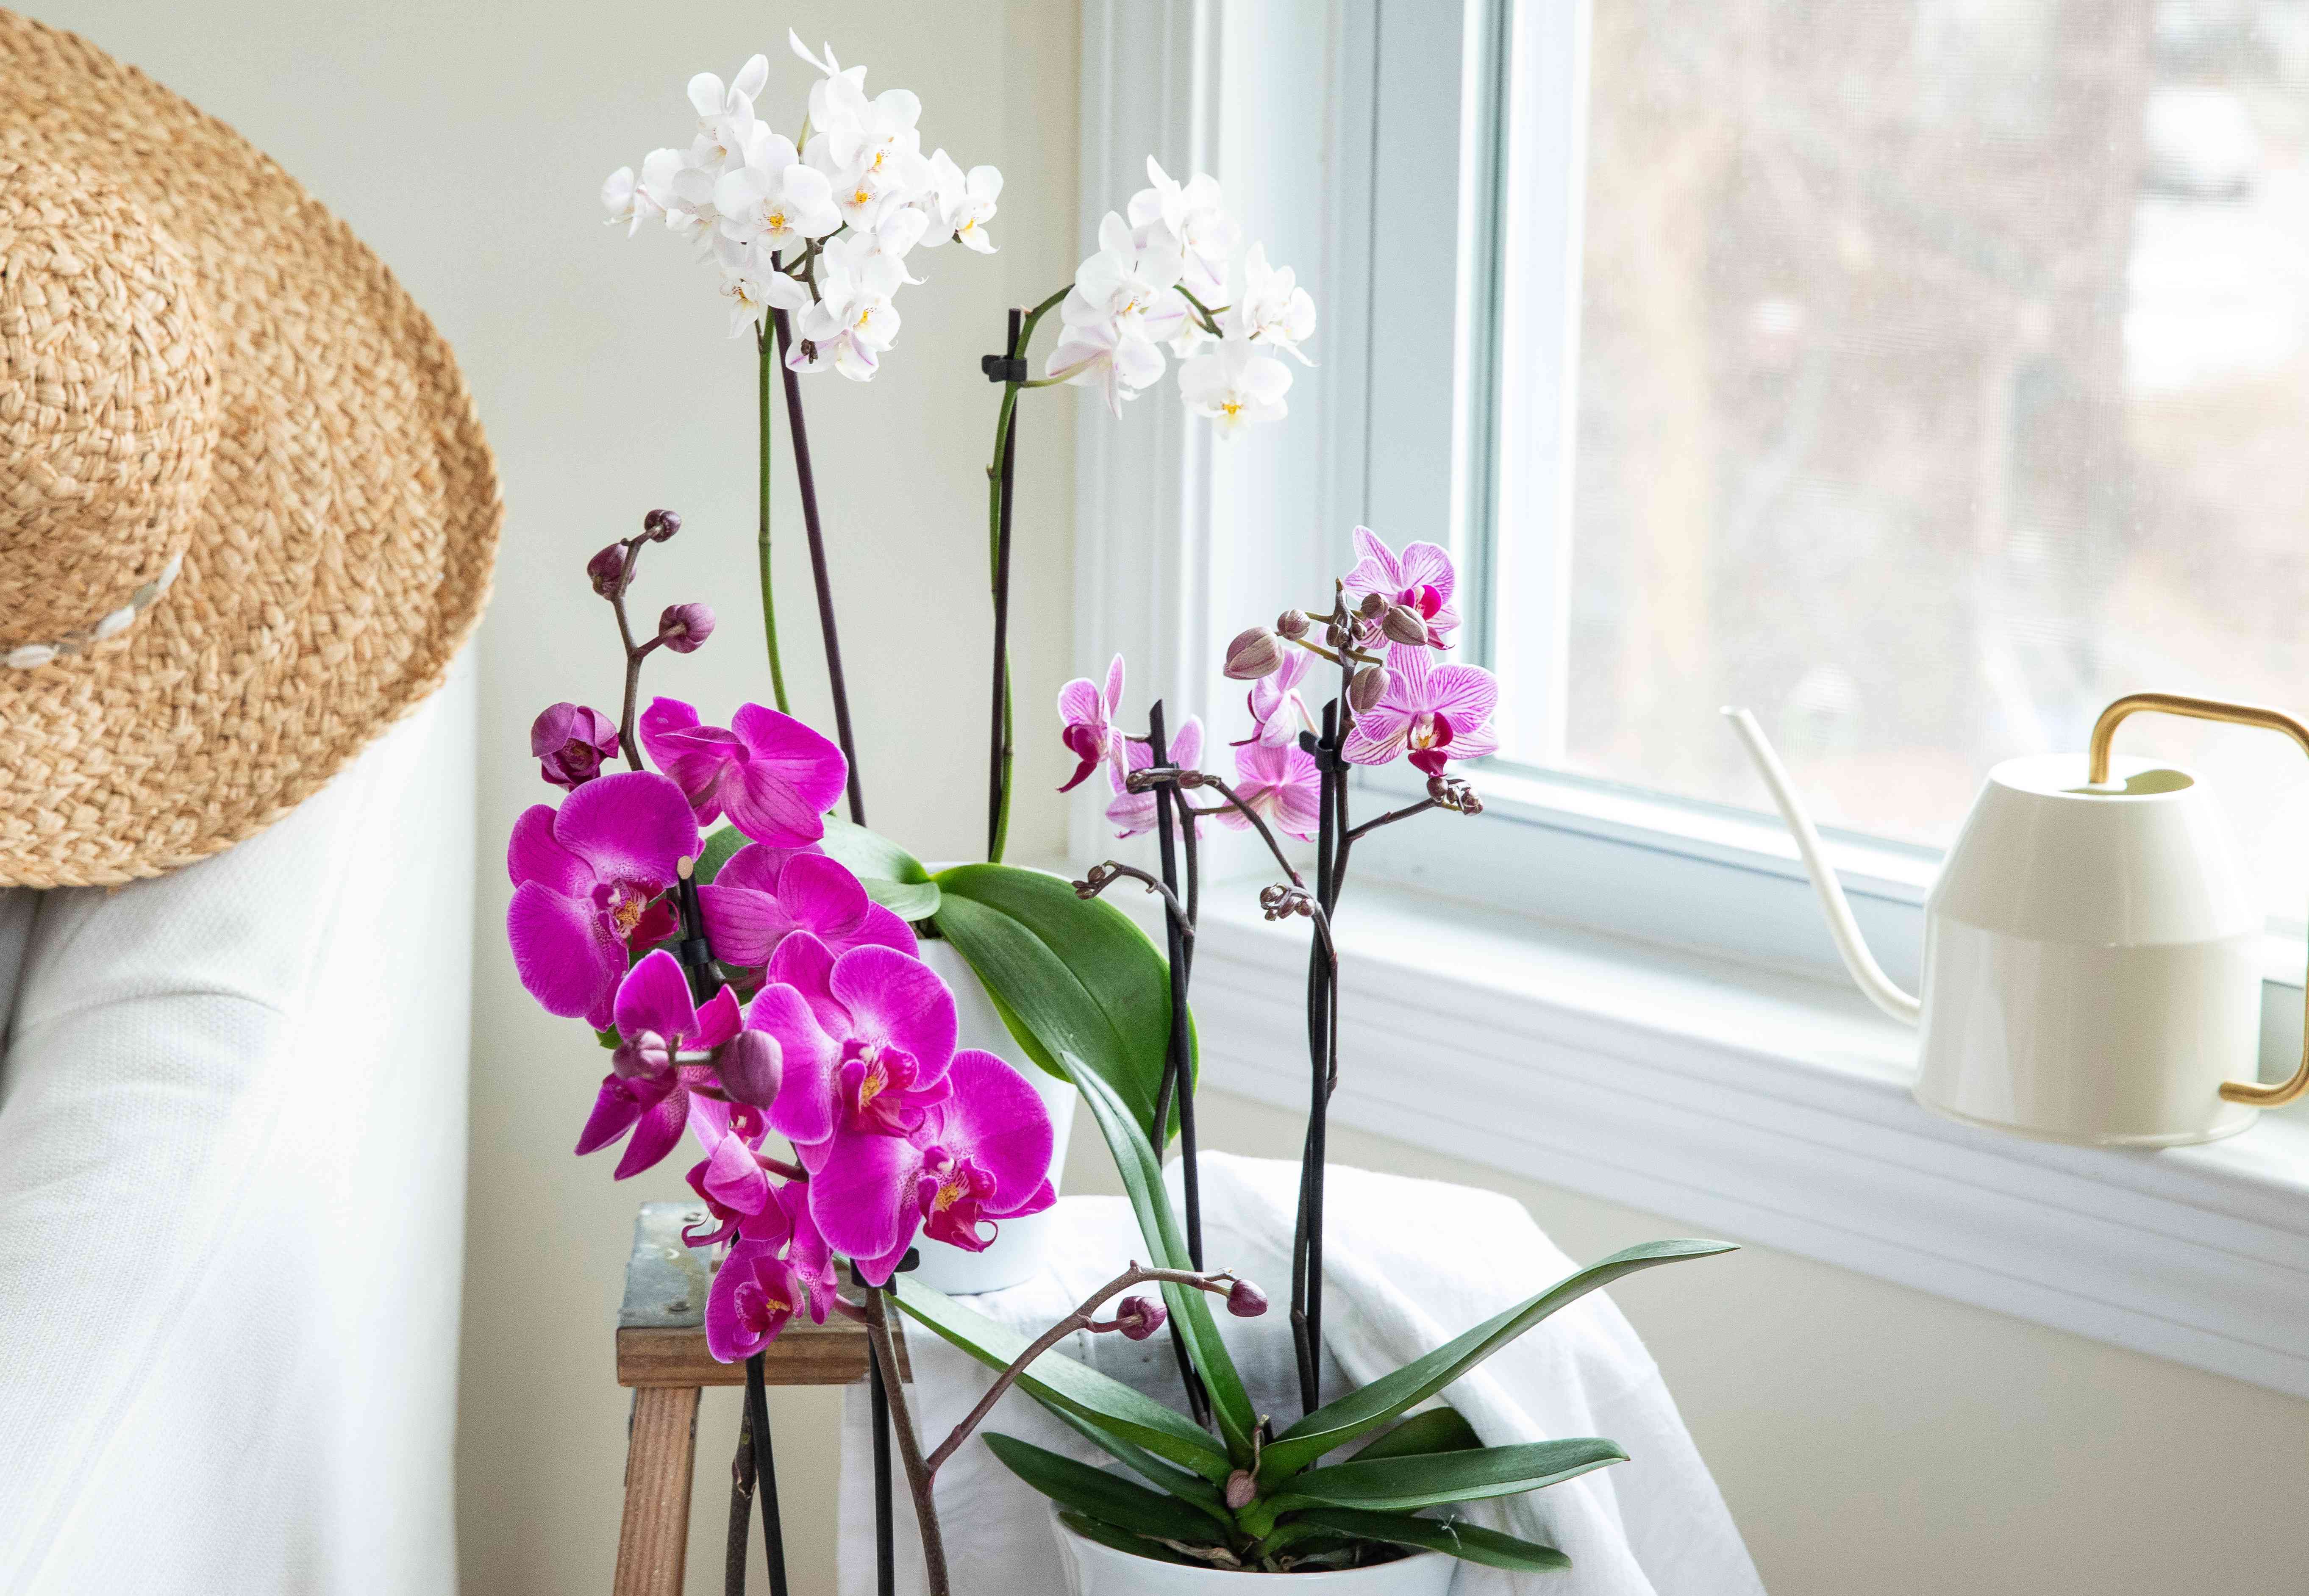 How to water orchids correctly – and the common watering mistakes that will harm your plant